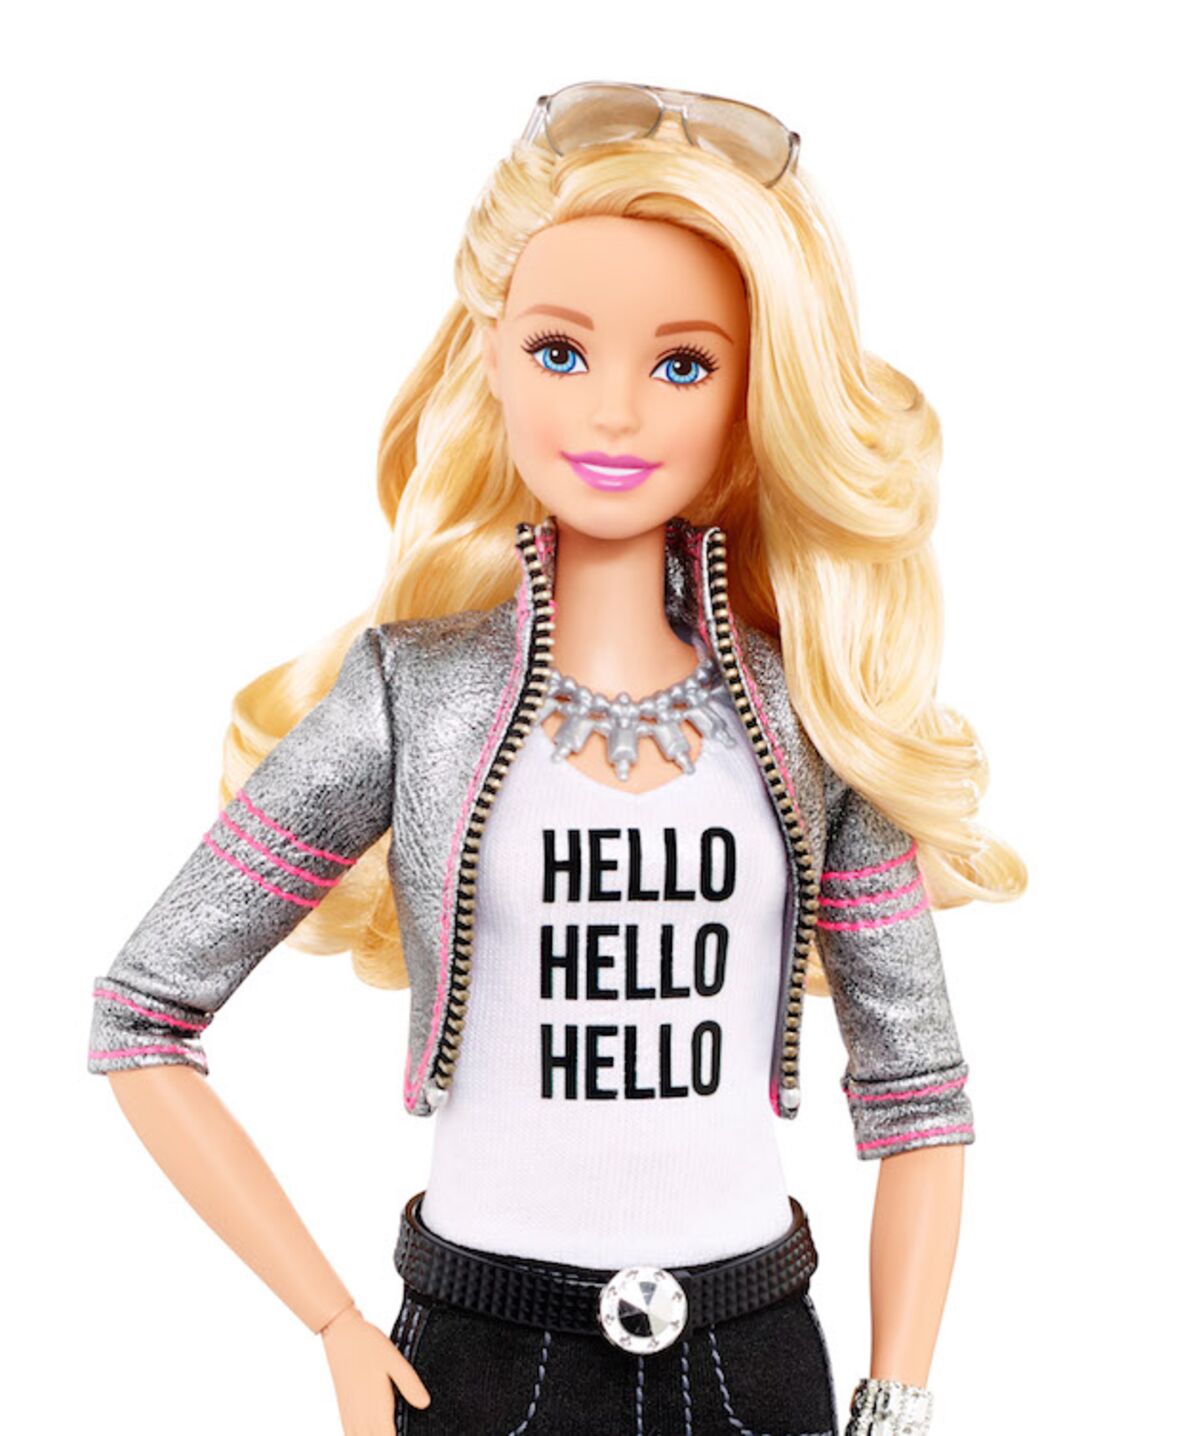 Barbie's Holiday Sales Grow for First Time in Four Years - Bloomberg